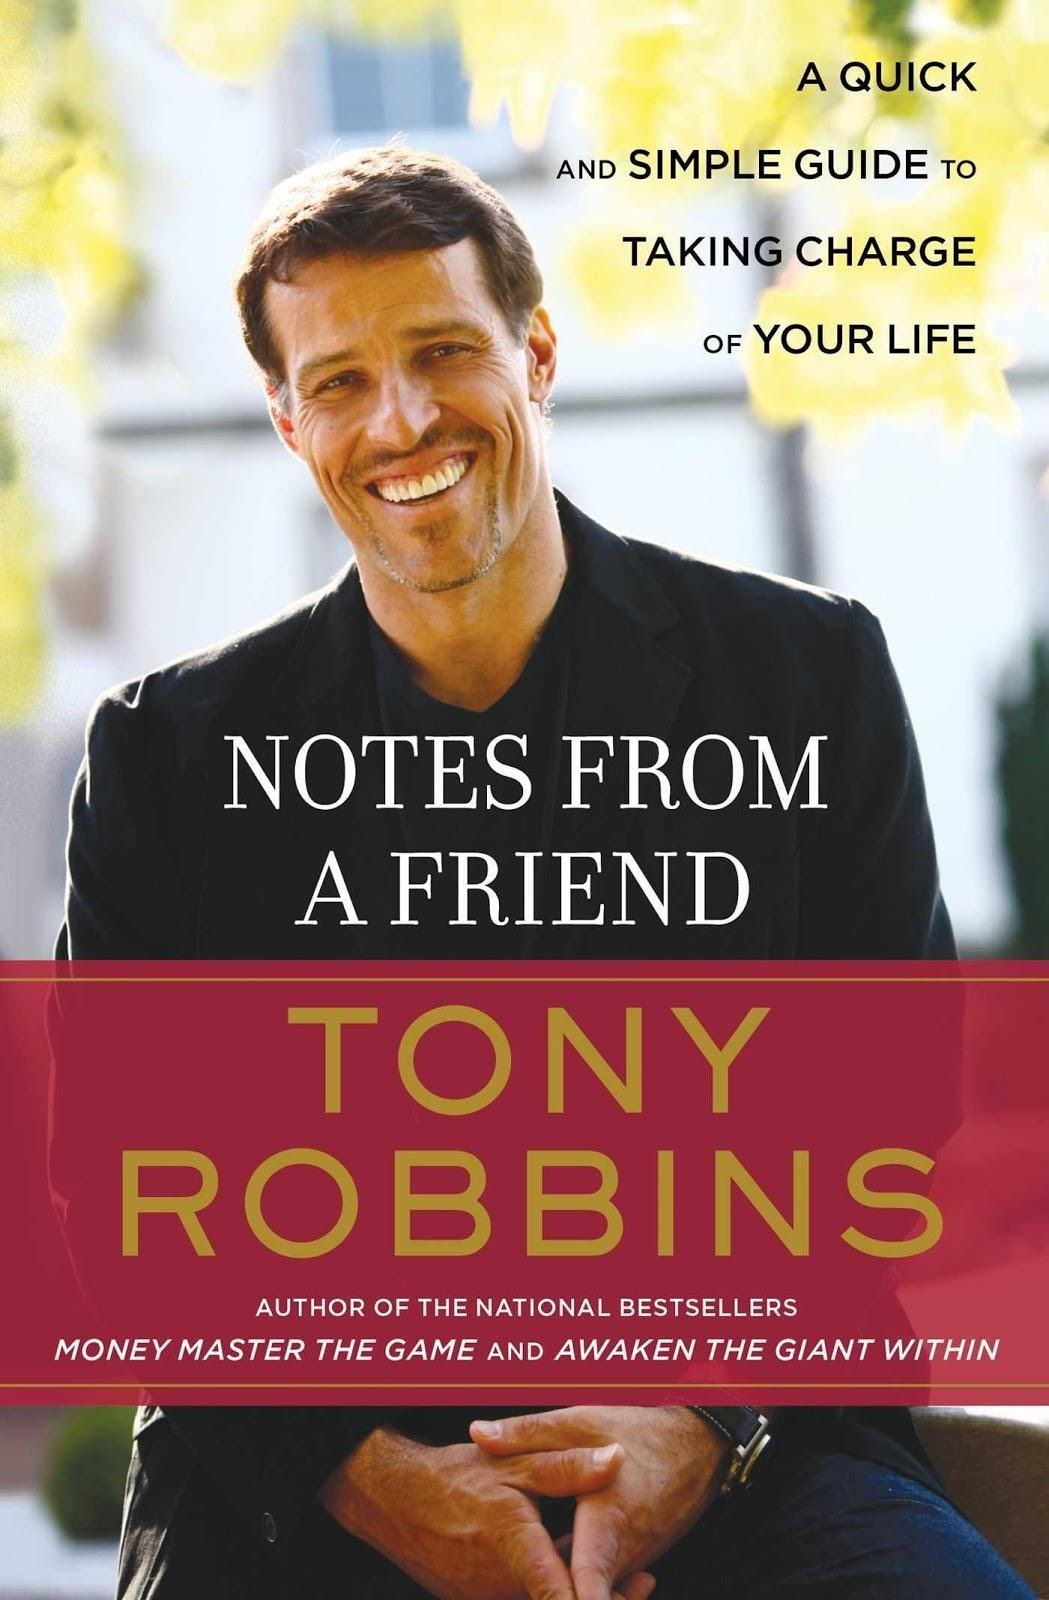 Libro “Notes From a Friend”